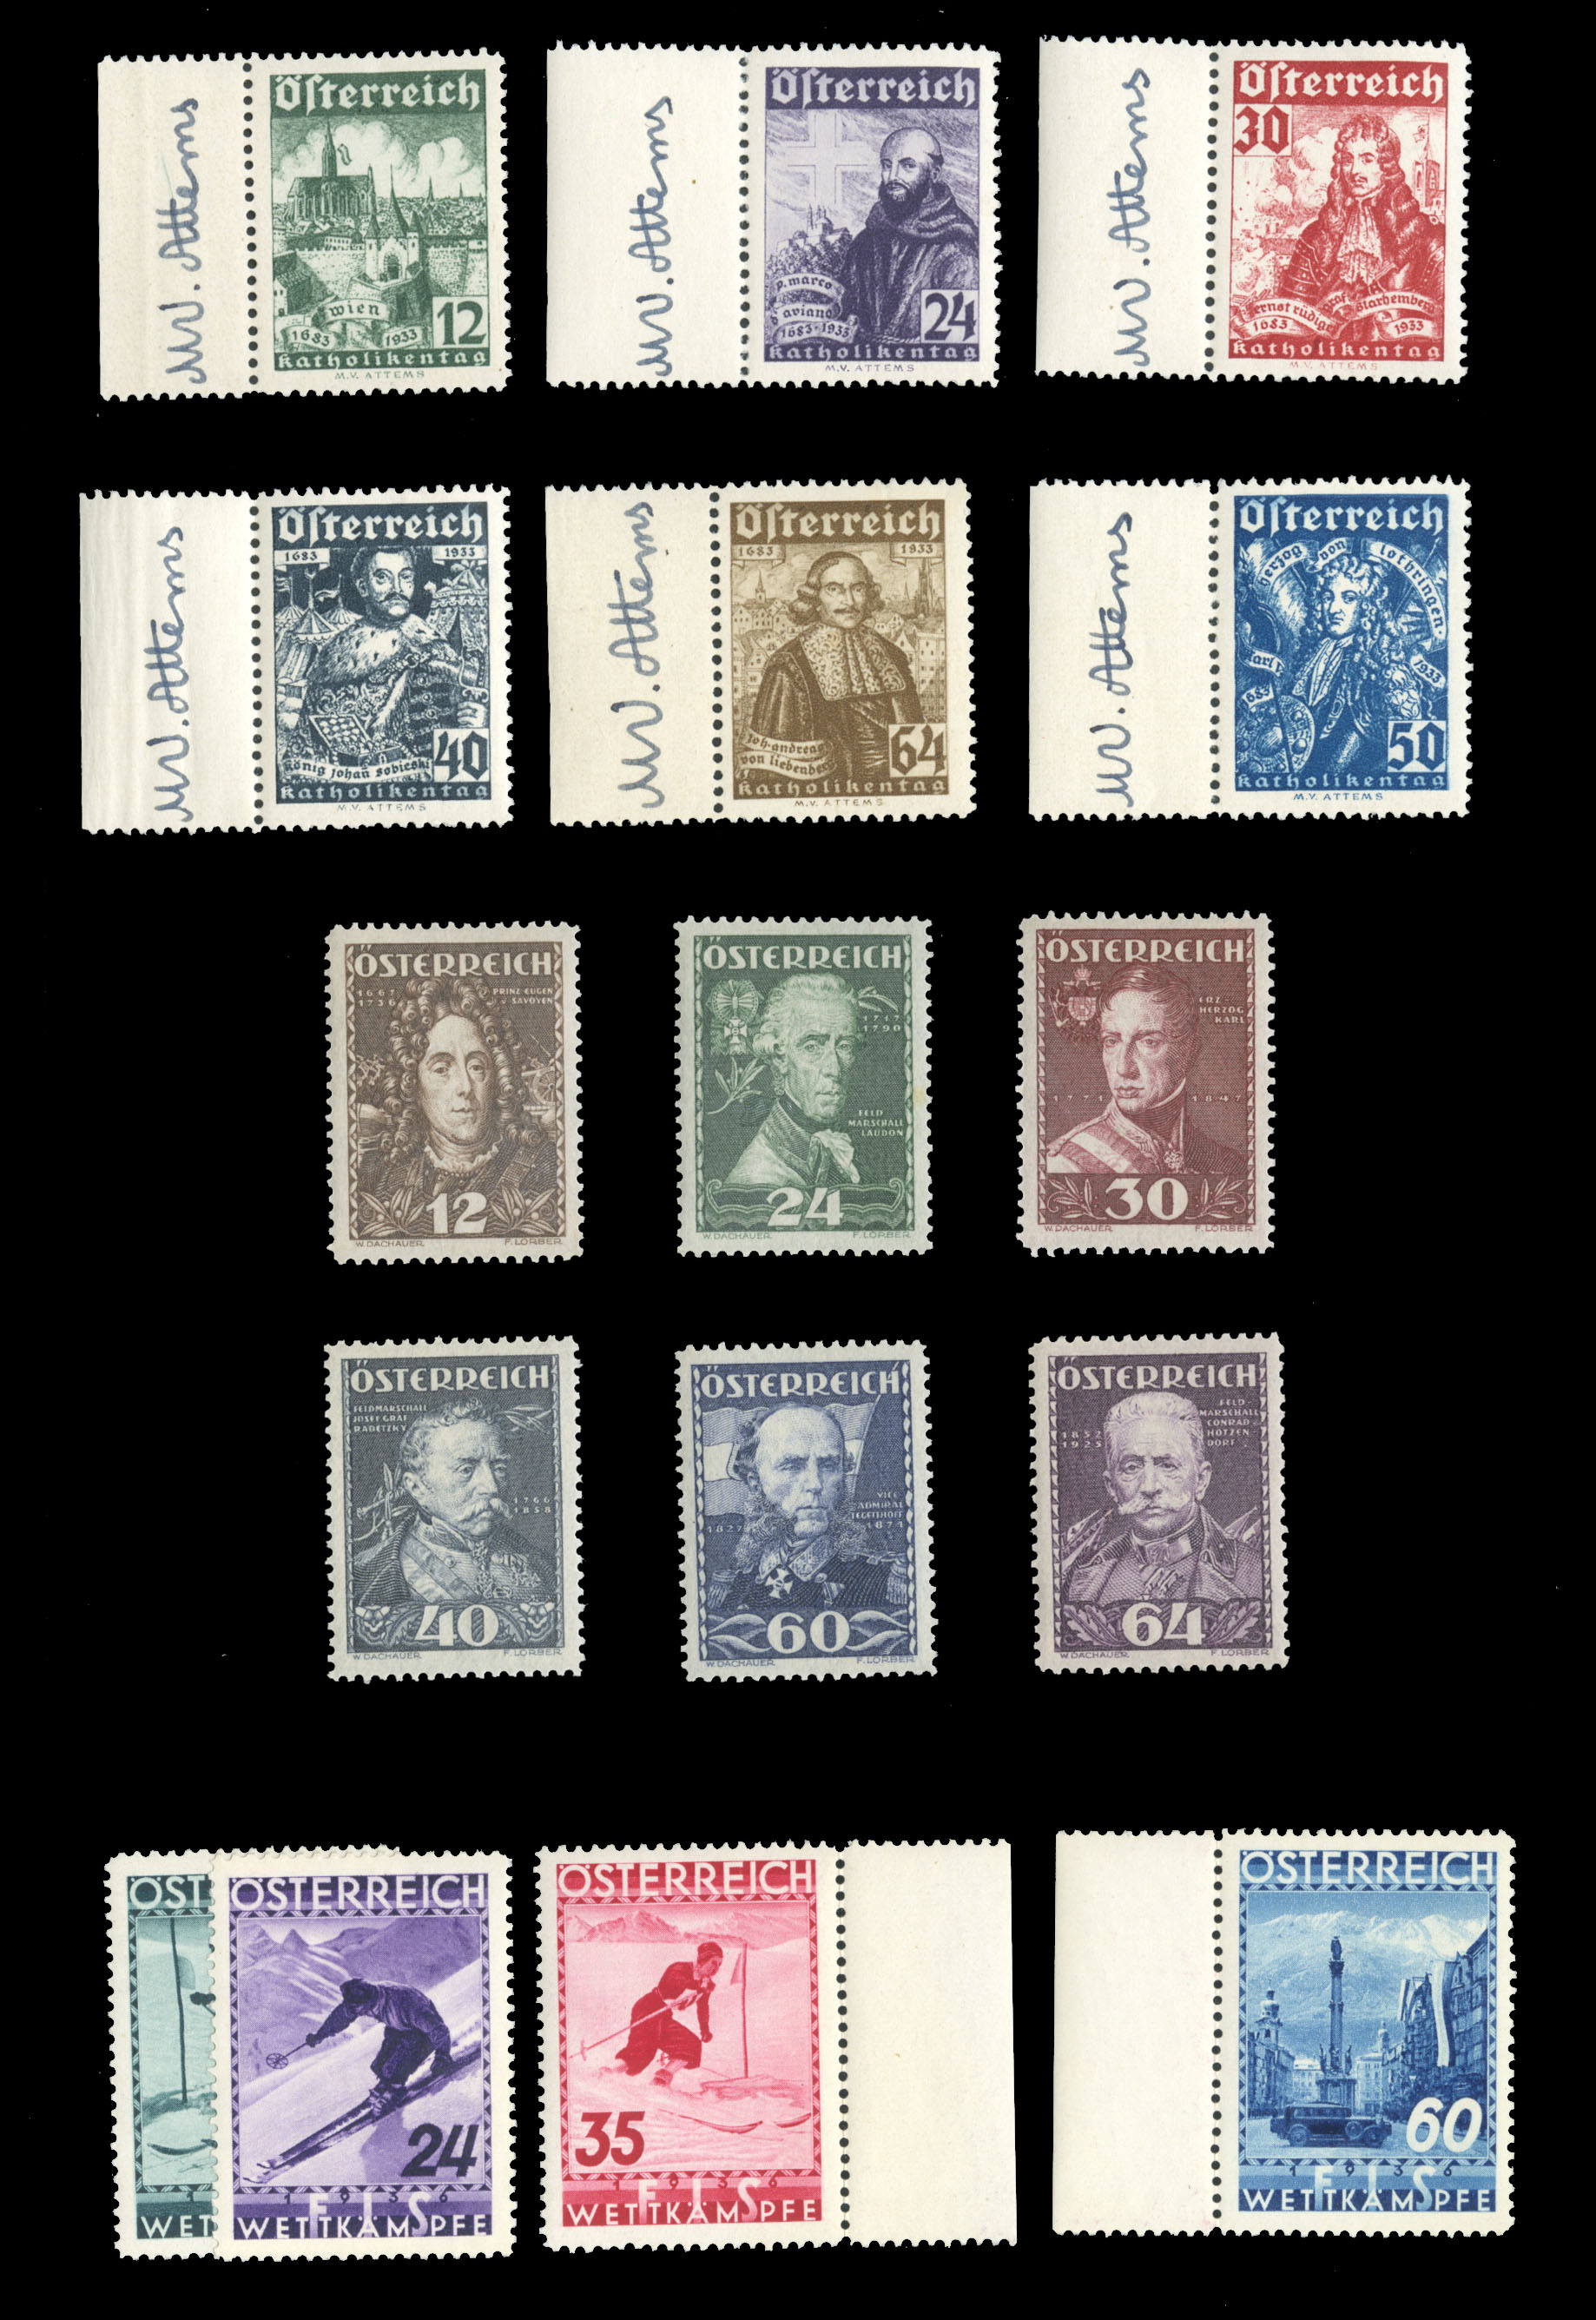 Lot 262 - AUSTRIA Austria - Post WWI Local Issues - Knittenfeld  -  Cherrystone Auctions U.S. & Worldwide Stamps & Postal History